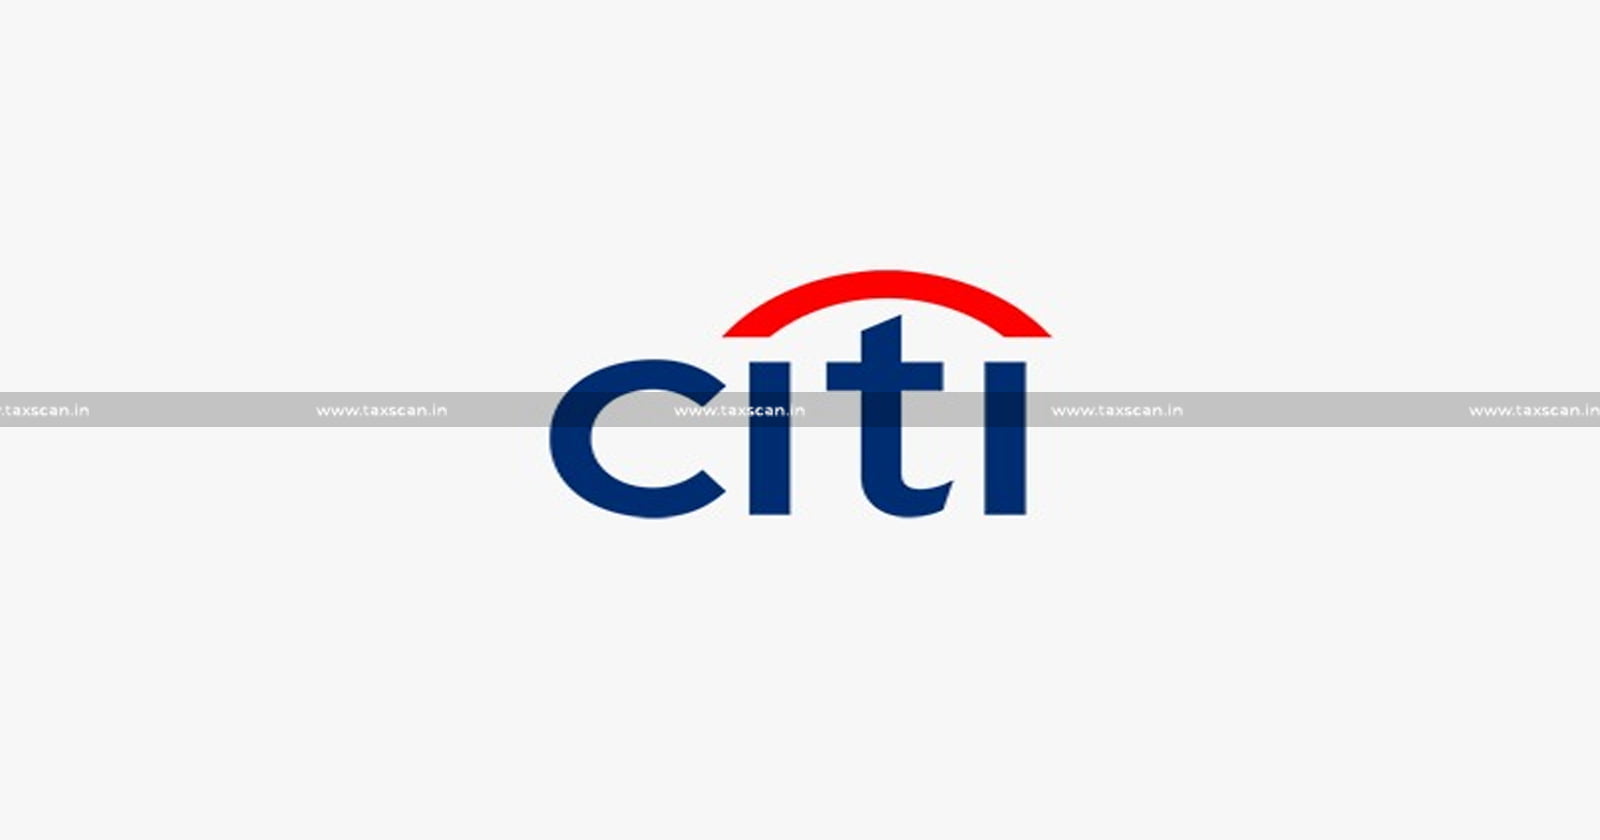 mba vacancy in citi - accounting careers in citi - accounting jobs - citi - ca opportunities in citi - taxscan